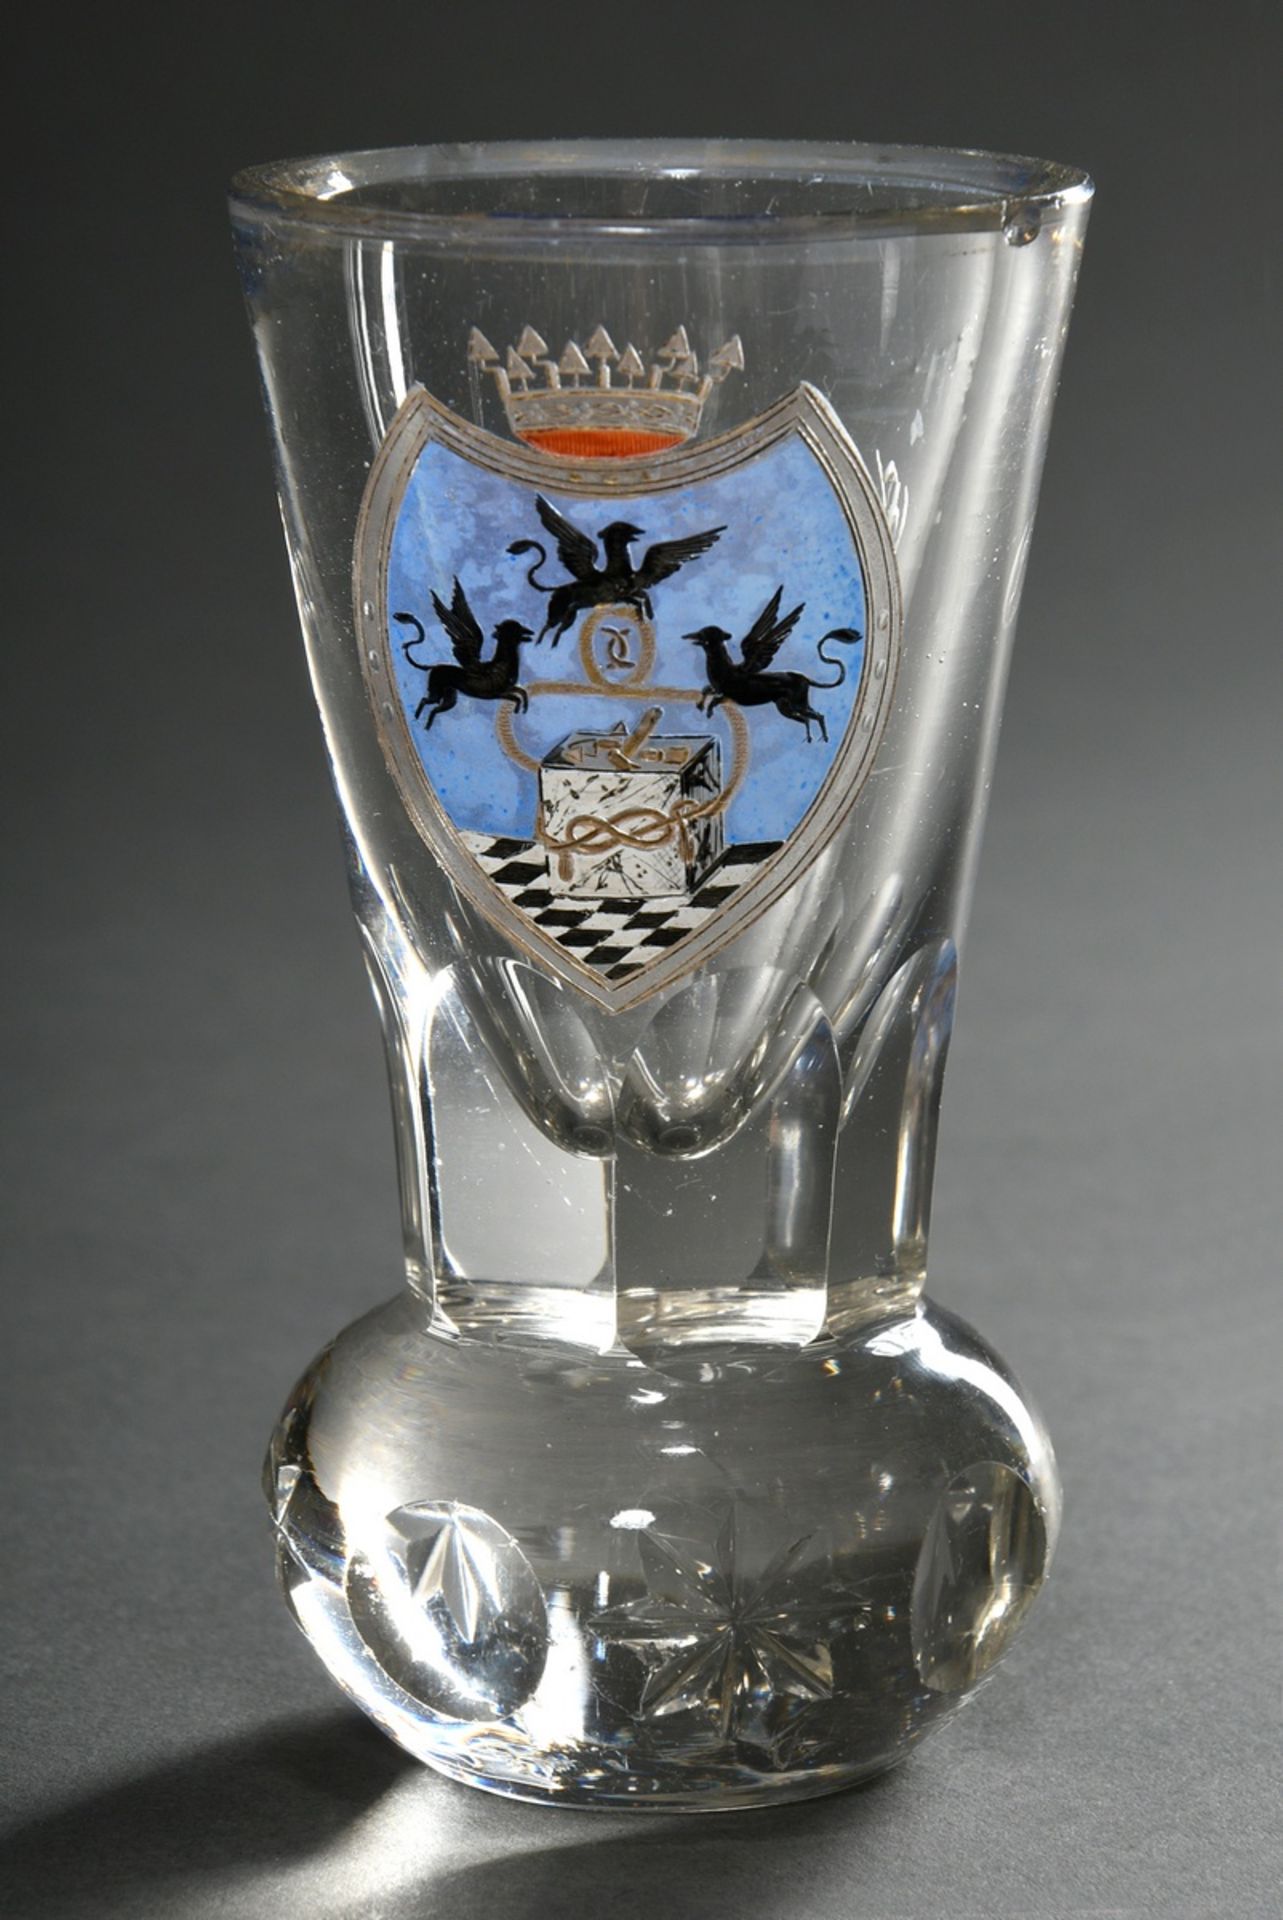 Masonic glass with cut and on the front coloured coat of arms under a 9-pointed crown "Three Griffi